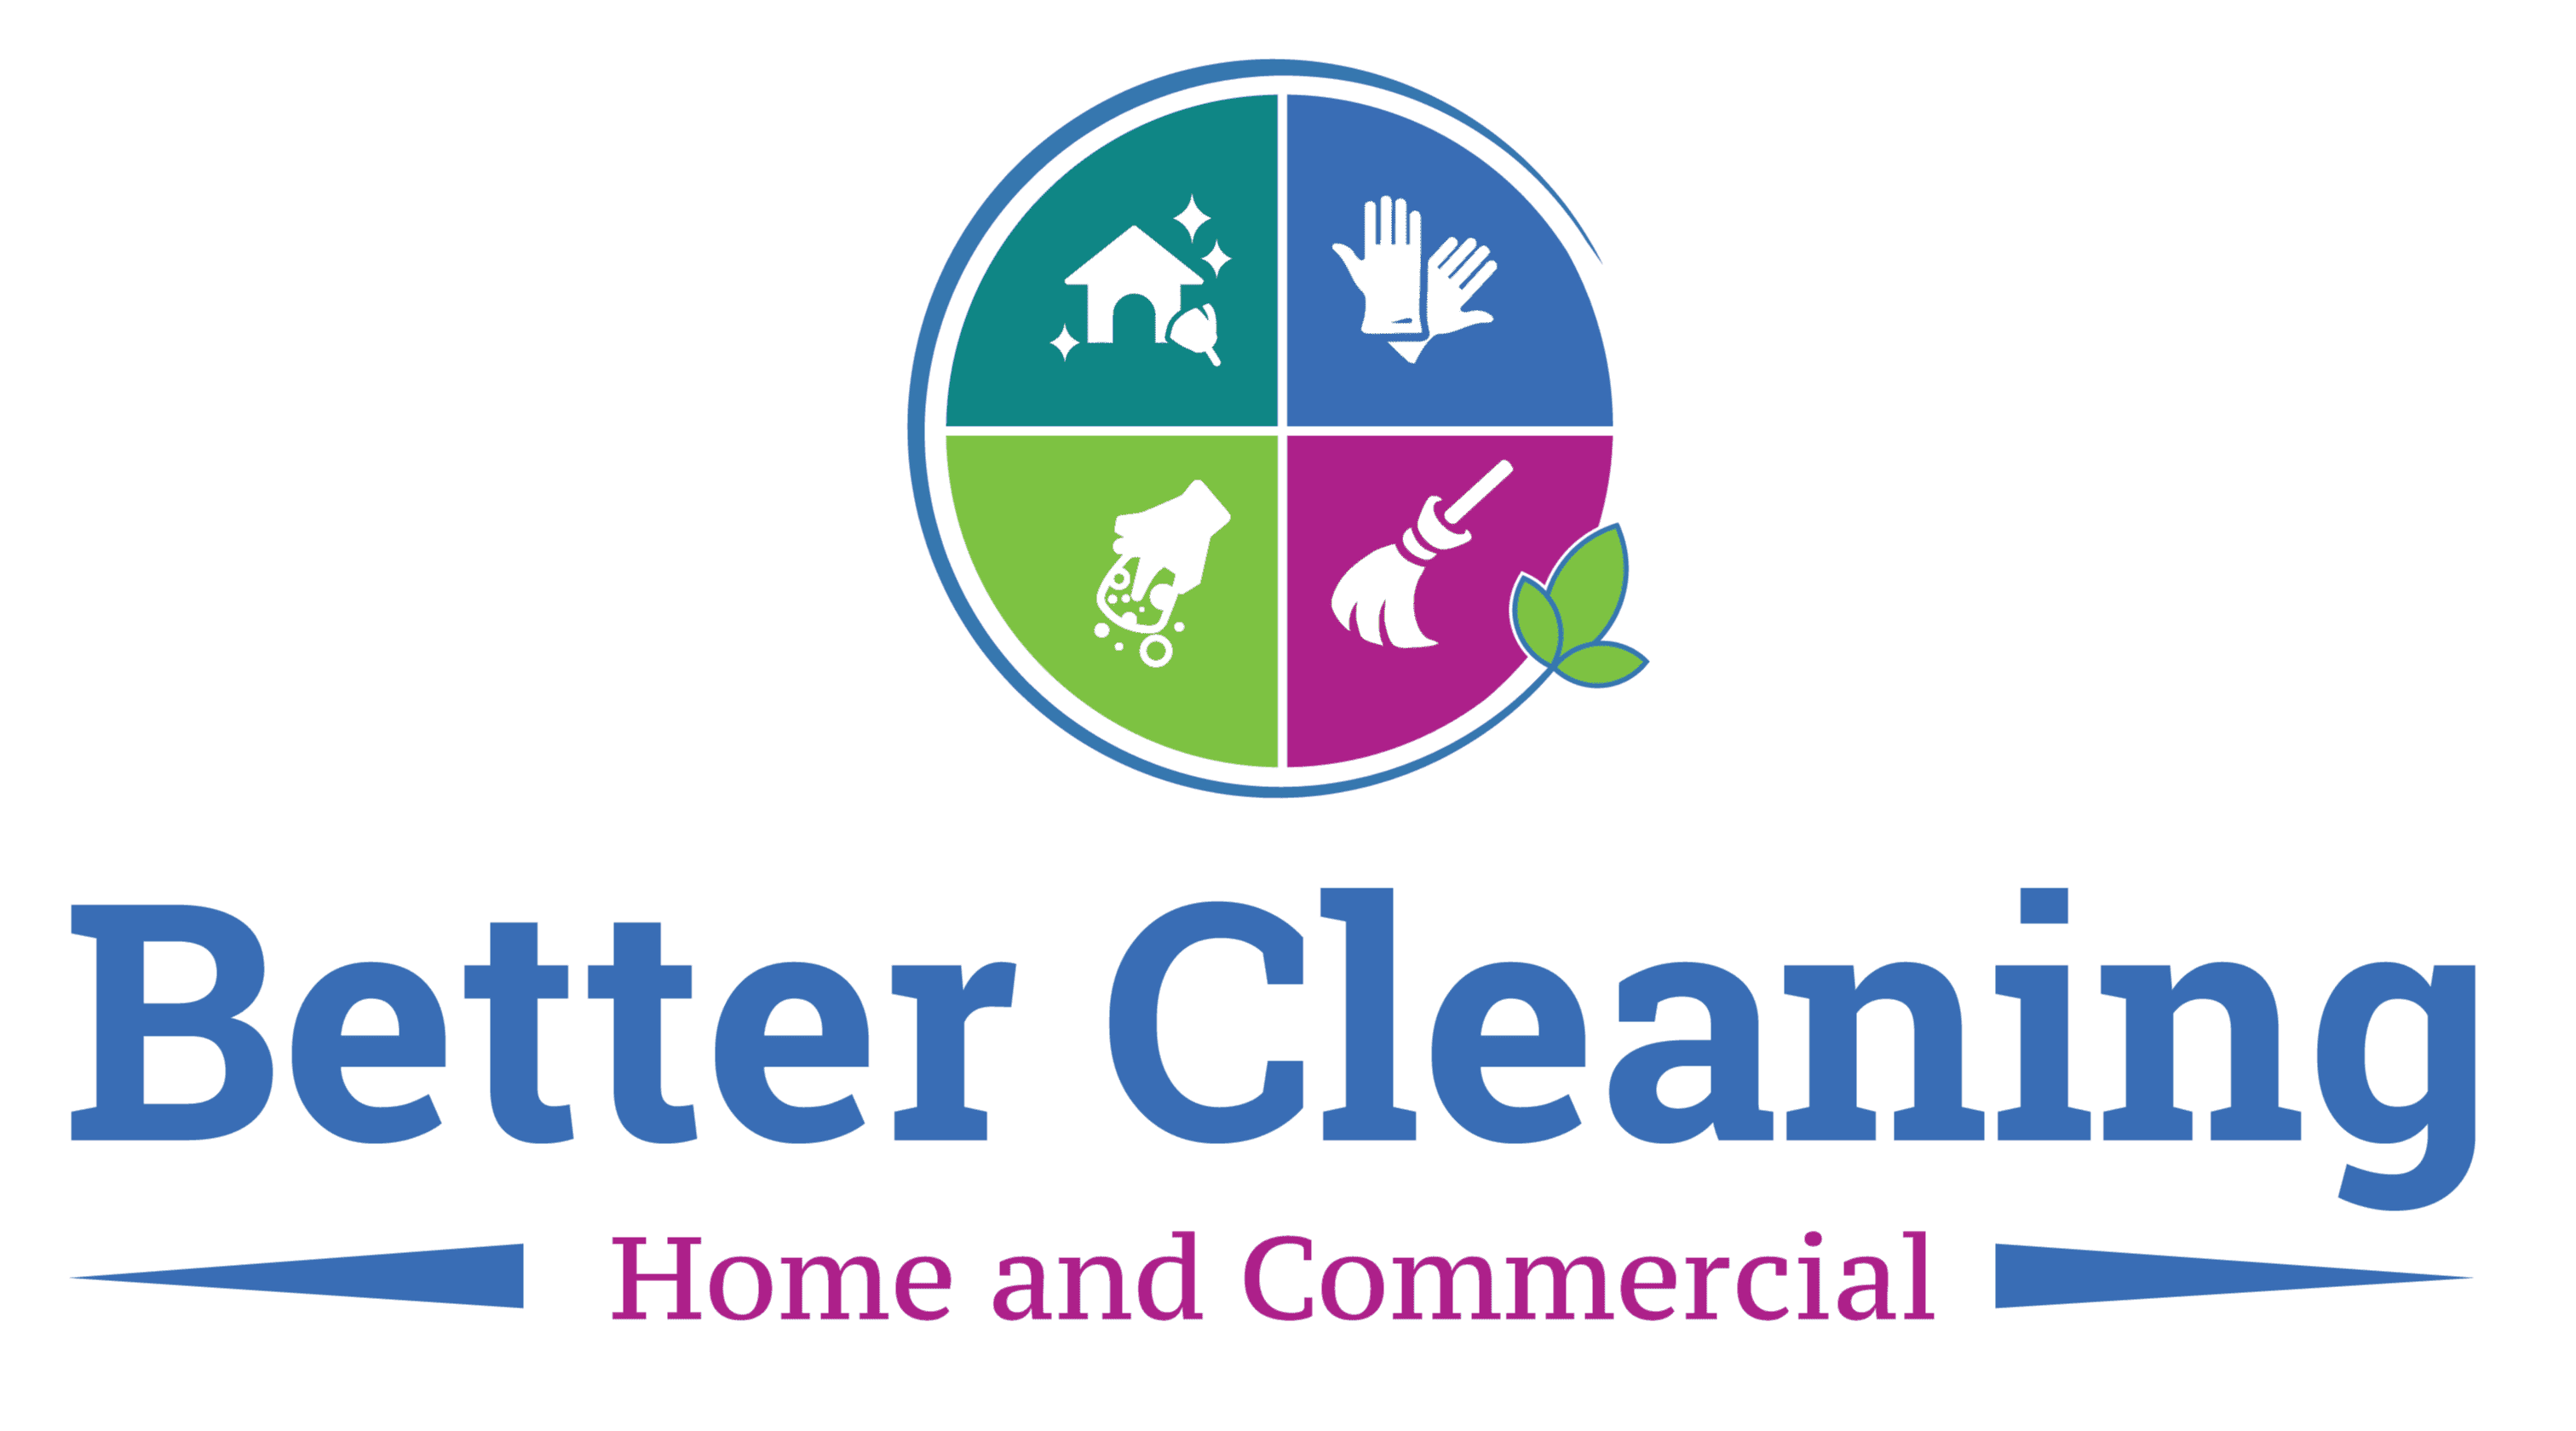 Better Cleaning LLC